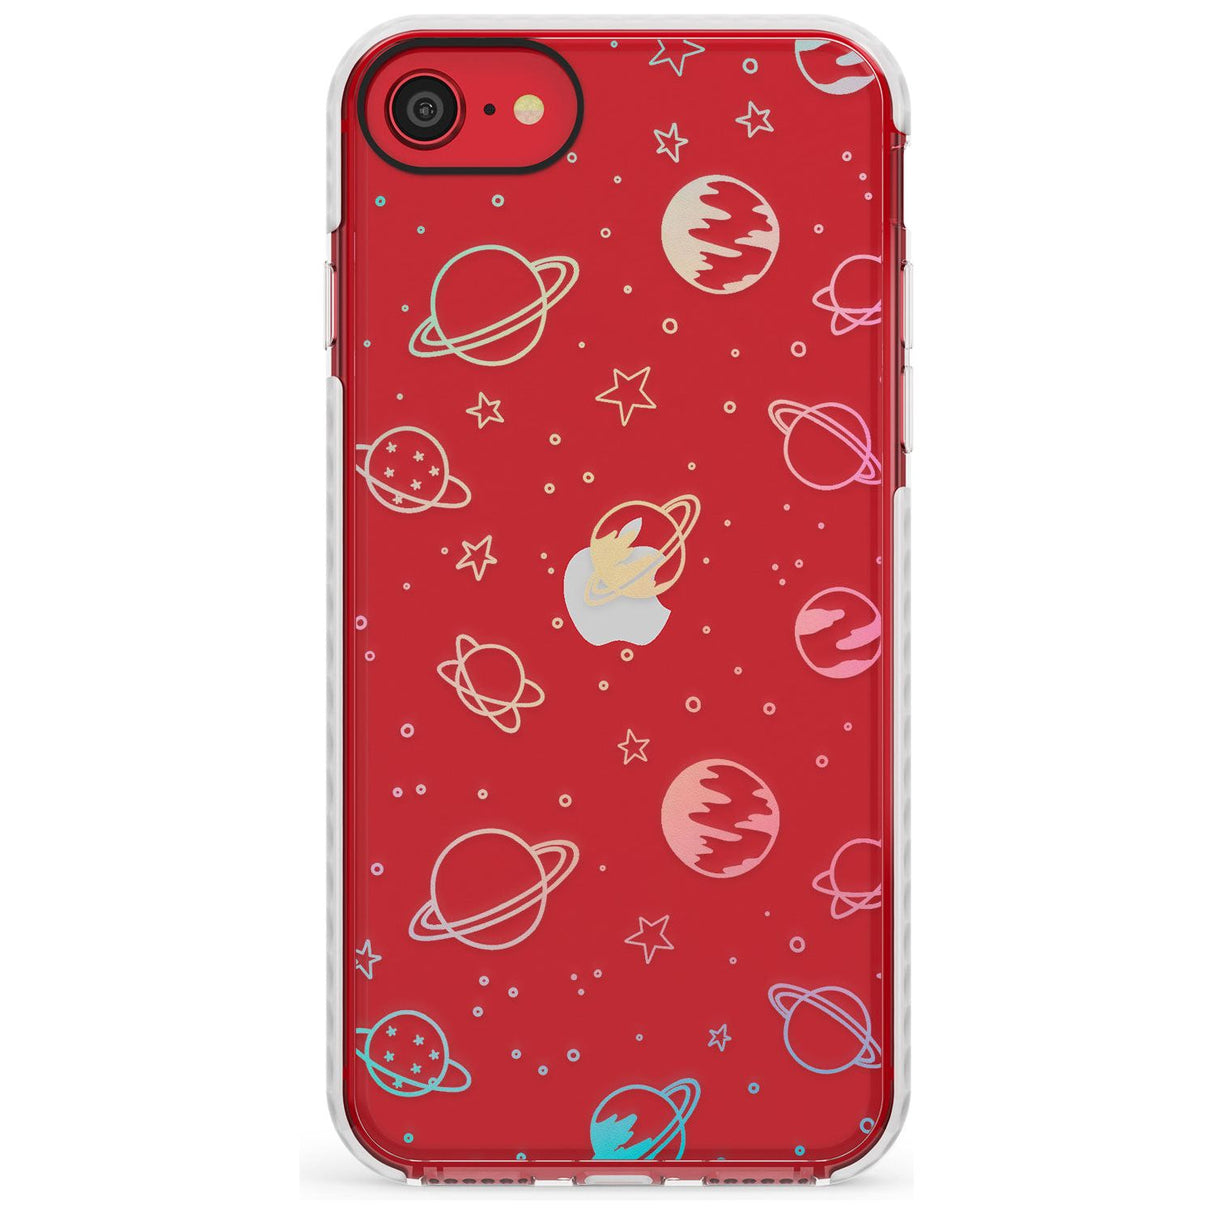 Outer Space Outlines: Pastels on Clear Slim TPU Phone Case for iPhone SE 8 7 Plus